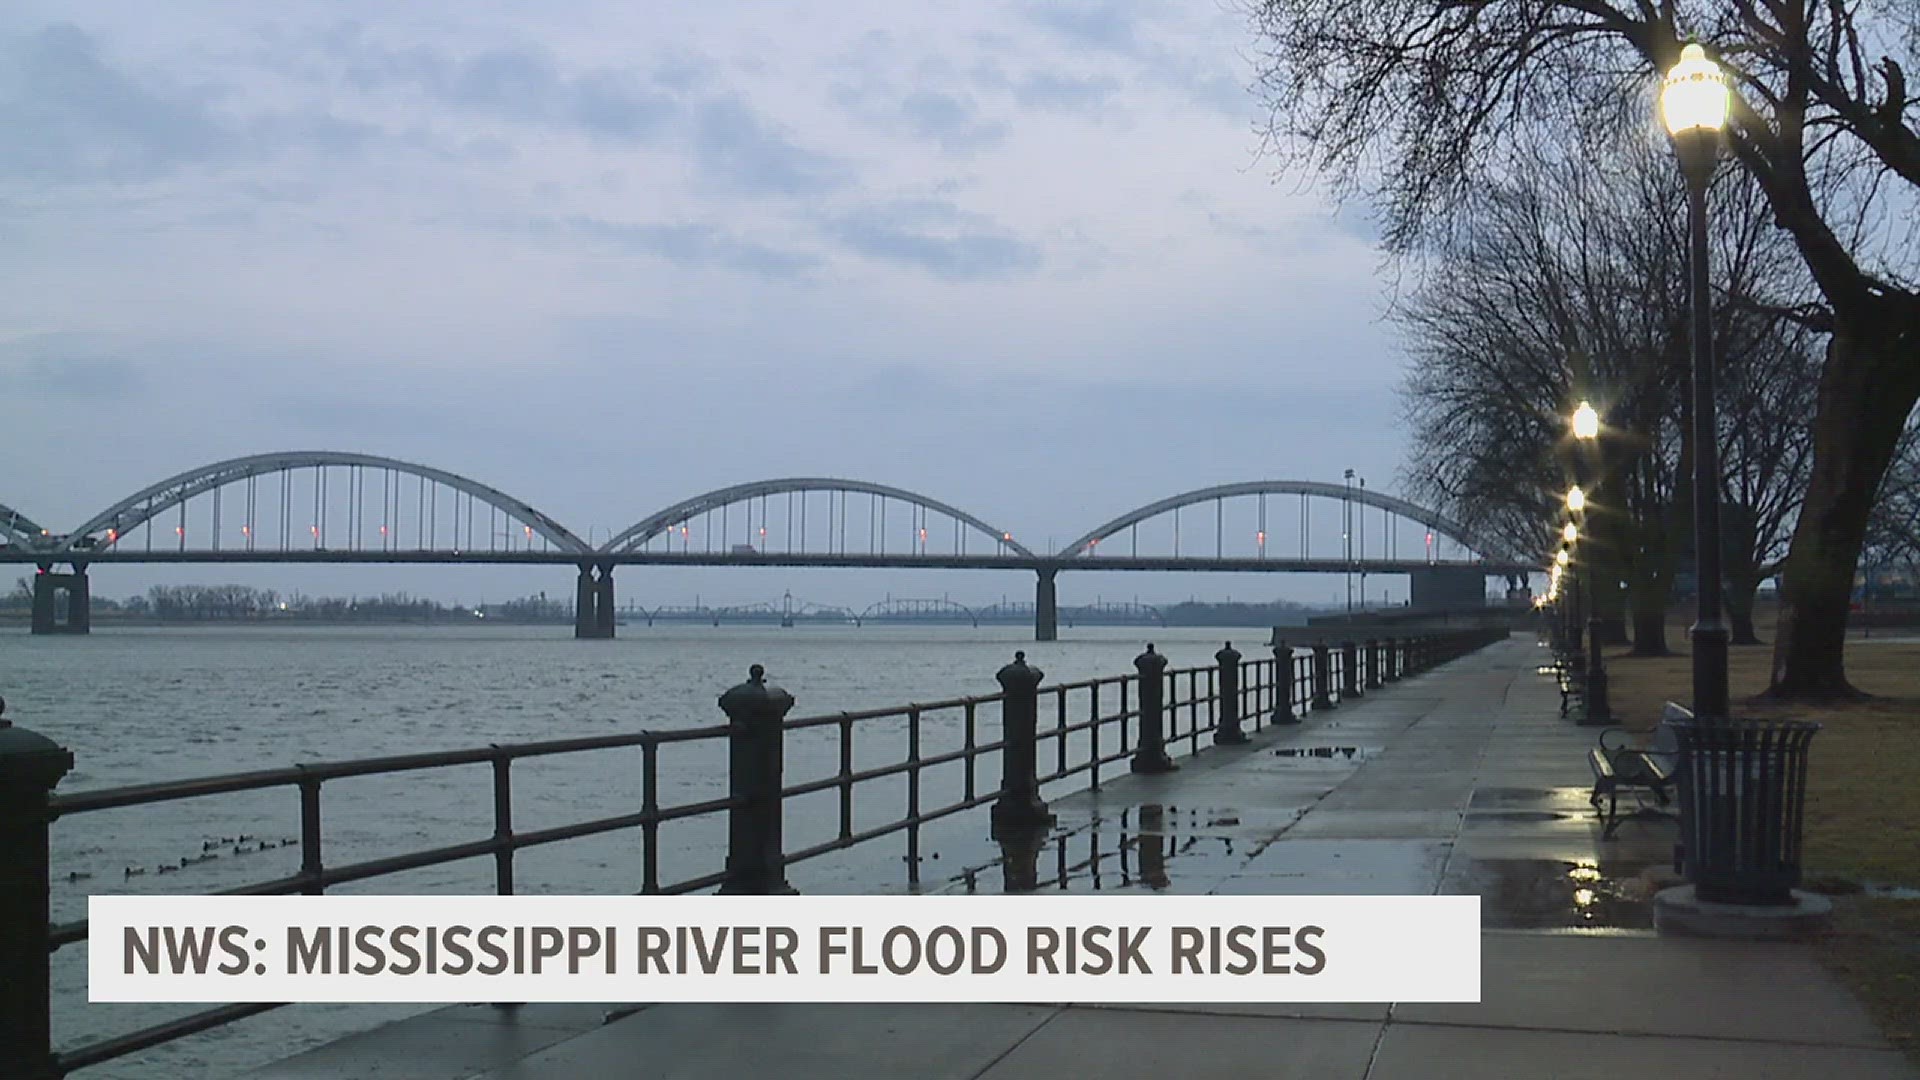 The Mississippi River is now at an 80% chance of reaching or exceeding the major flood stage by the end of May.